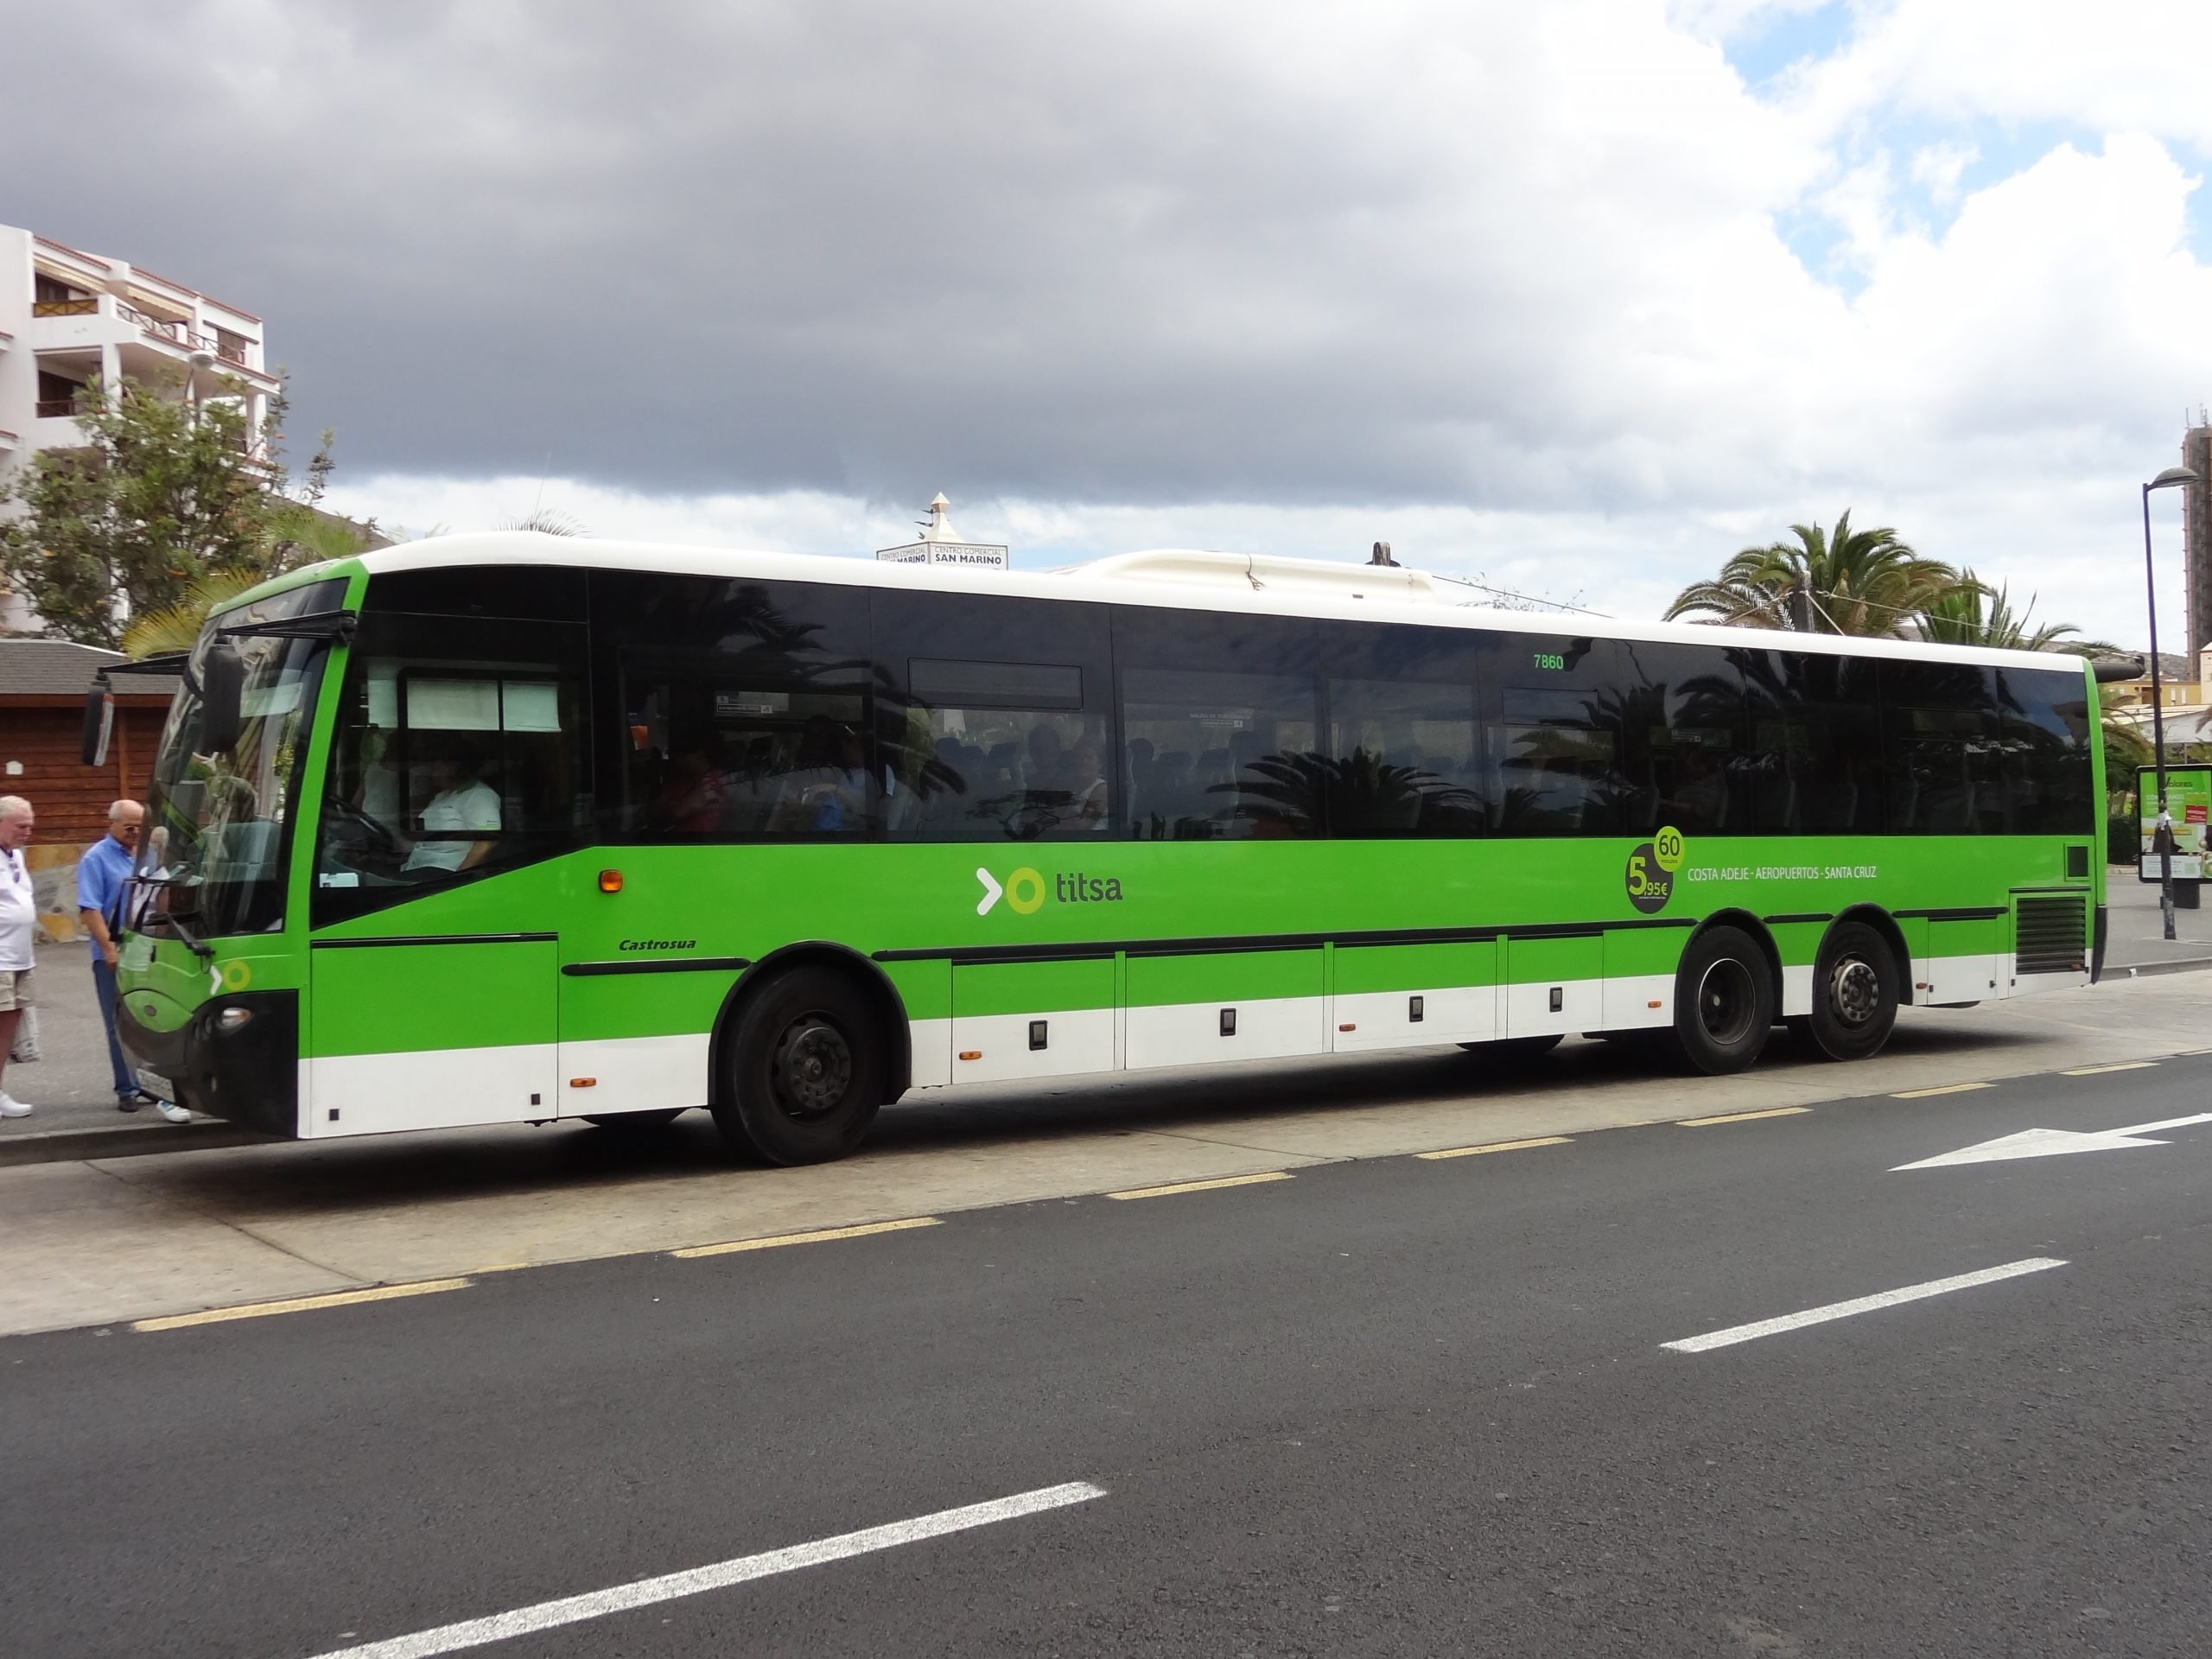 How To Get From South Tenerife Airport To Los Cristianos - All Possible Ways, cheapest way from Tenerife airport to Los Cristianos, Tenerife airport to Los Cristianos, Tenerife airport to Los Cristianos, Tenerife airport to Los Cristianos, Tenerife Bus Airport, bus from Tenerife airport to Los Cristianos, taxi Tenerife airport to Los Cristianos, Uber Tenerife airport to Los Cristianos, Tenerife airport to Los Cristianos by bus, Tenerife airport to Los Cristianos, Tenerife to Los Cristianos, Titsa bus fare Tenerife airport to Los Cristianos, Day Travel Card Tenerife Buses